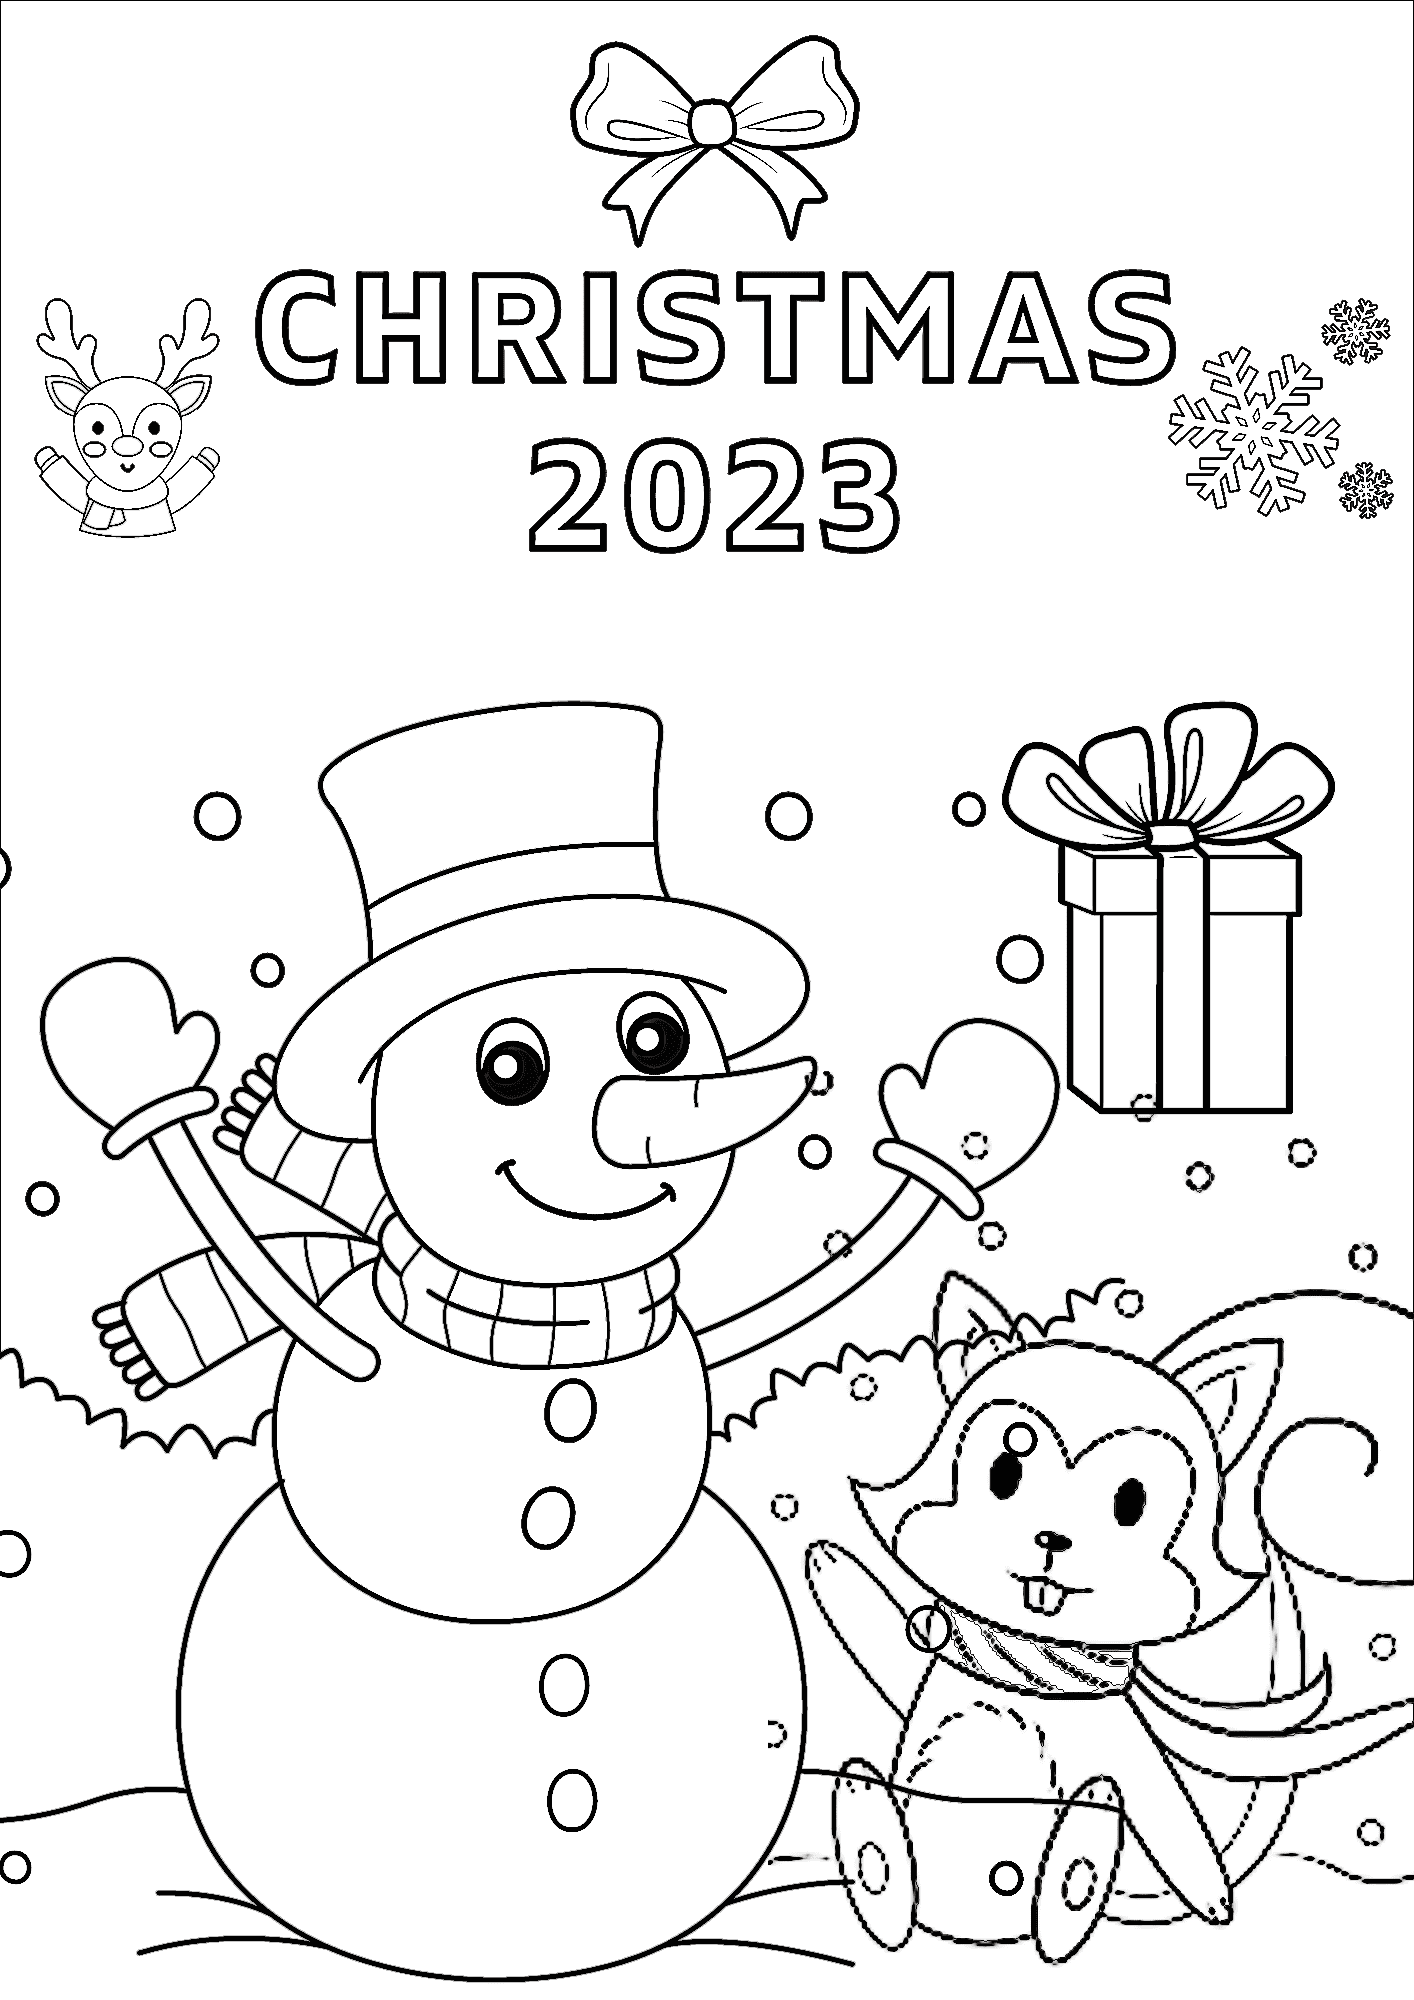 Merry Christmas 2023 Drawing Coloring Page